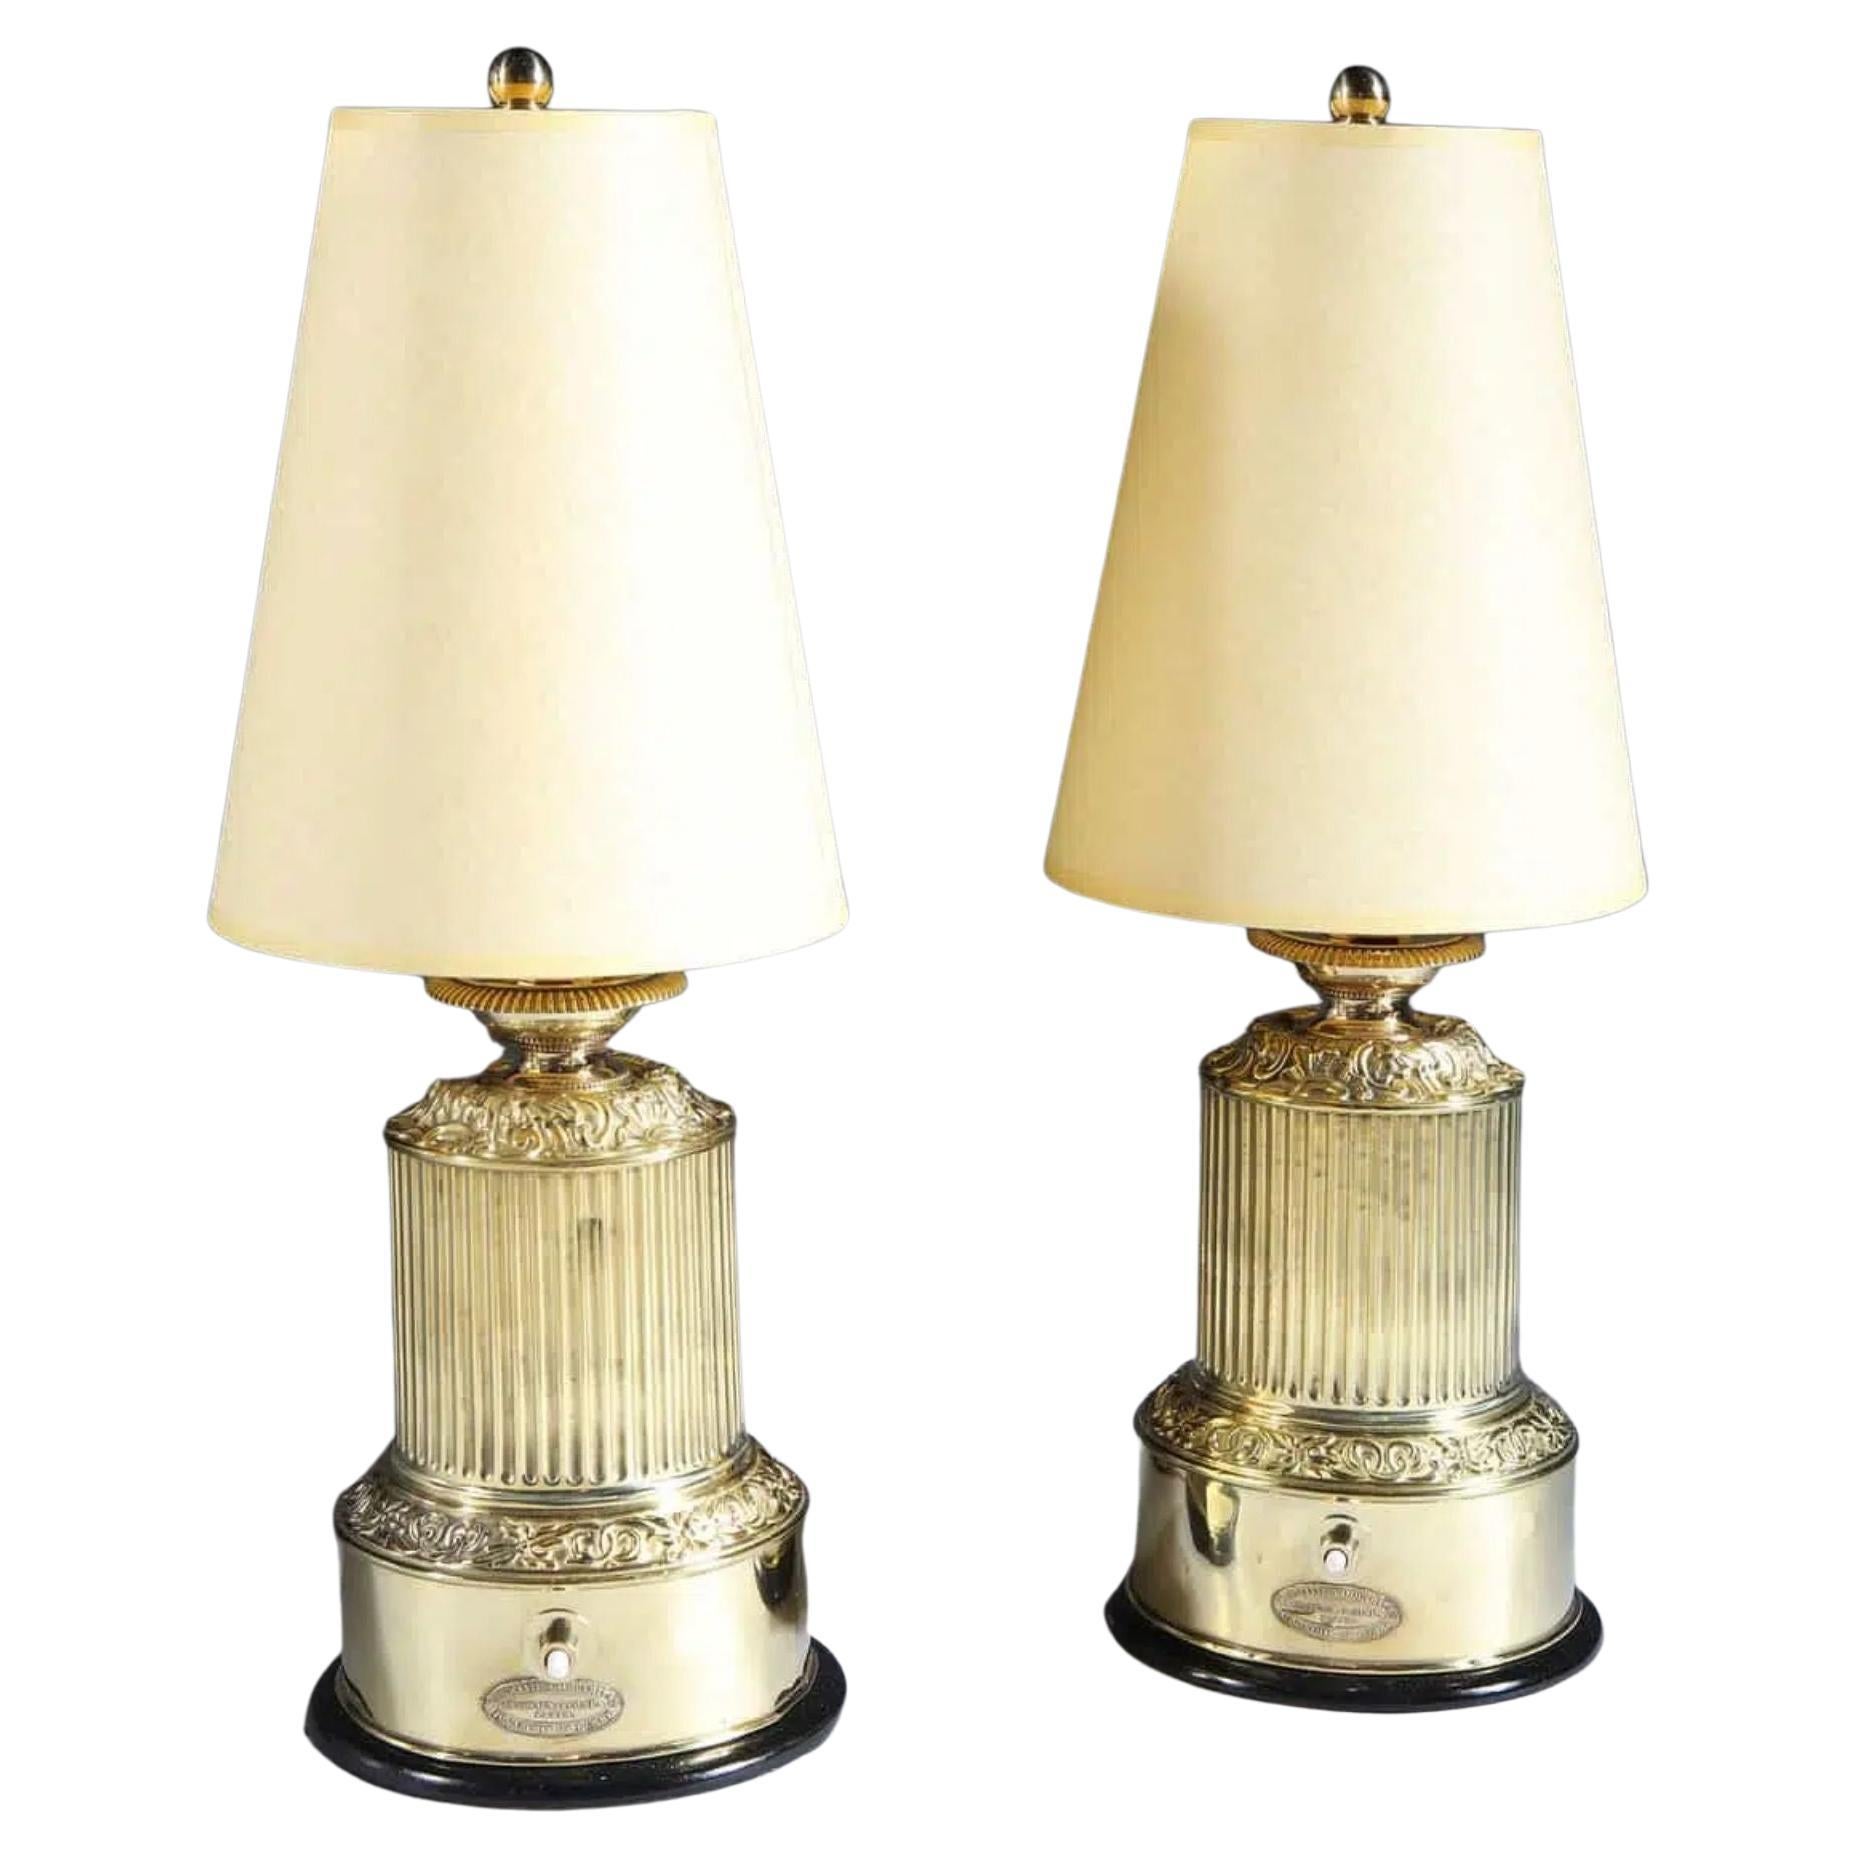 Pair of French Polished Brass Antique Table Lamps, 19th Century For Sale